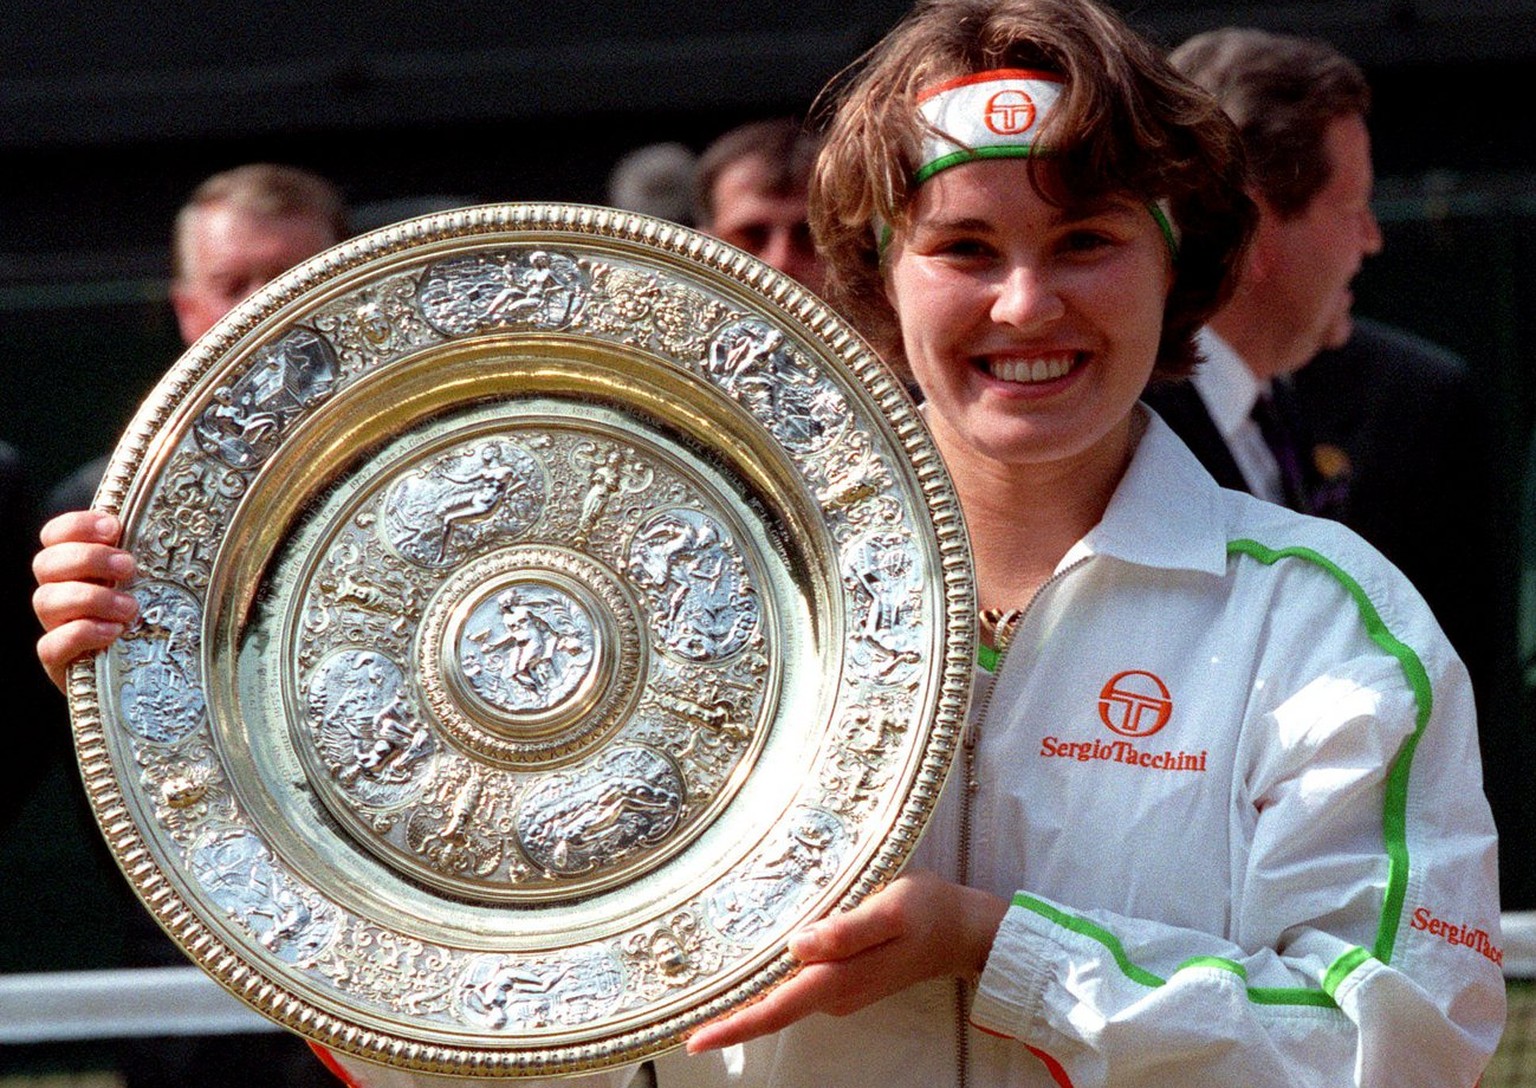 Martina Hingis holds her trophy, after defeating Jana Novotna in the Women&#039;s Singles final on the Centre Court at Wimbledon, July 5, 1997. Hingis won the final 2-6, 6-3, 6-3, to become the younge ...